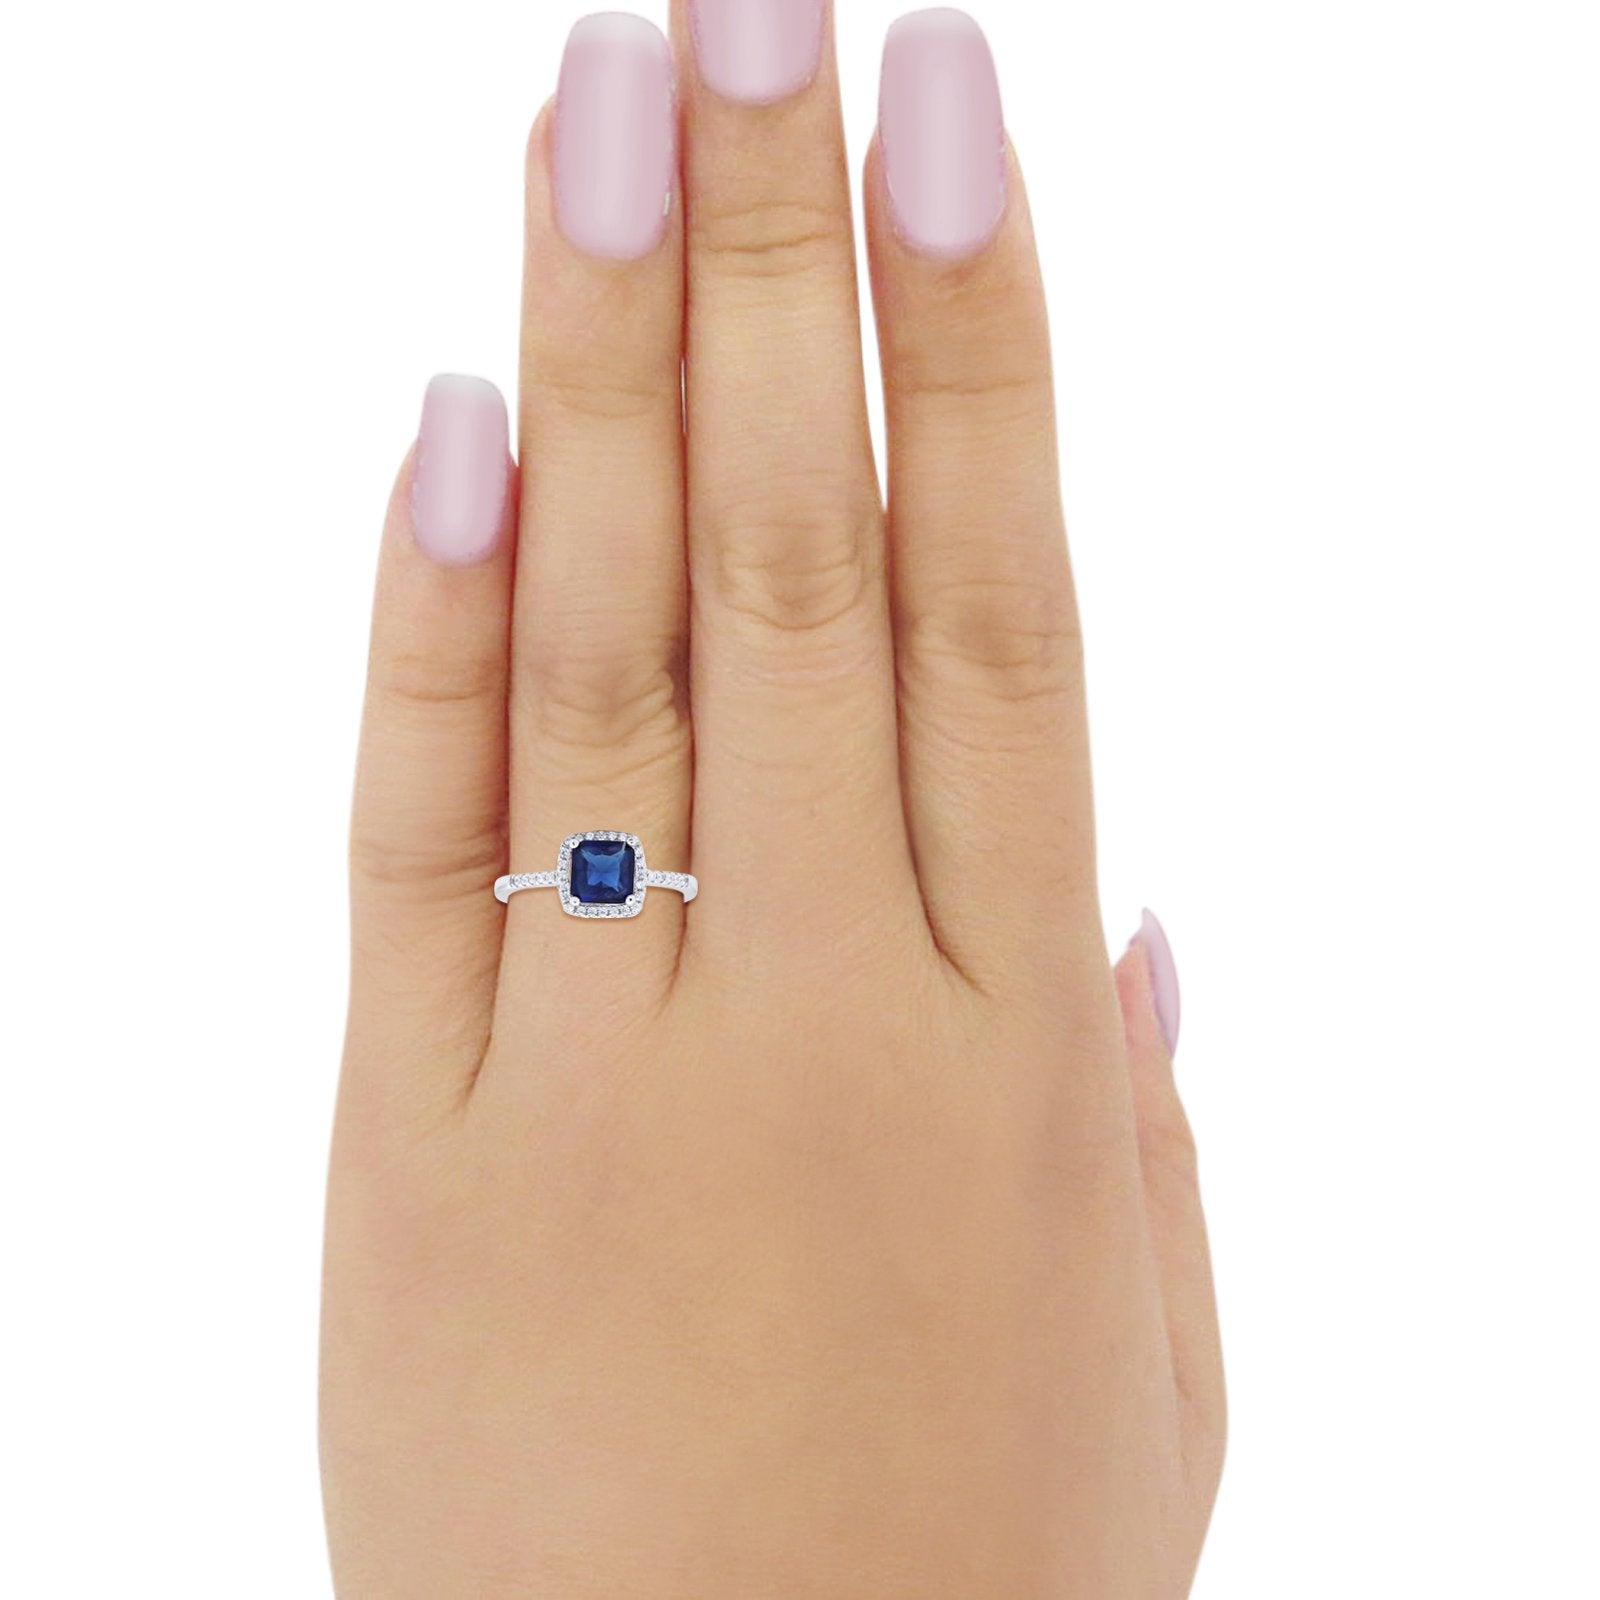 Princess Cut Wedding Ring Round Simulated Blue Sapphire CZ 925 Sterling Silver